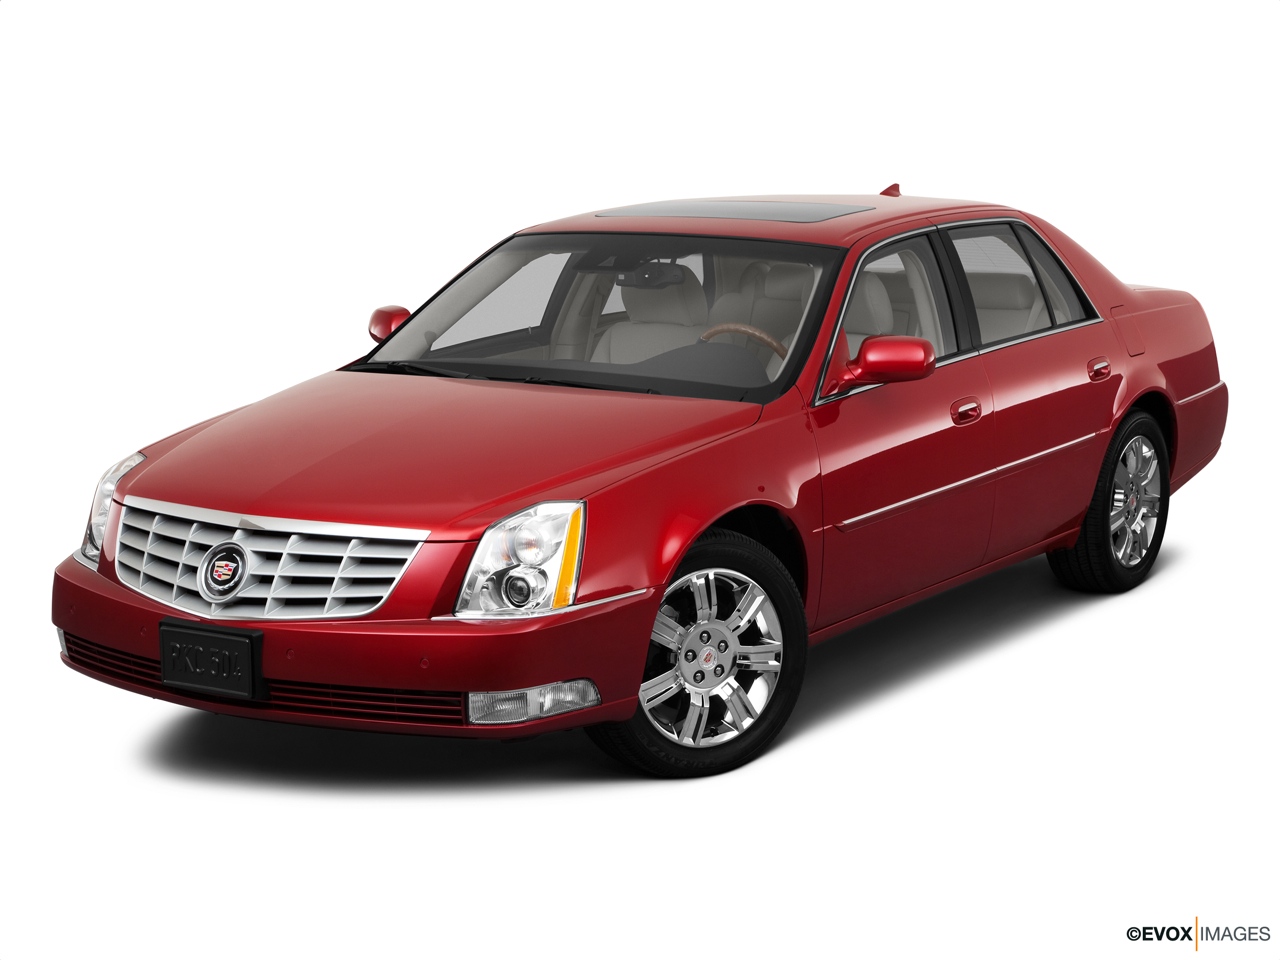 2011 Cadillac DTS Platinum Front angle view. 